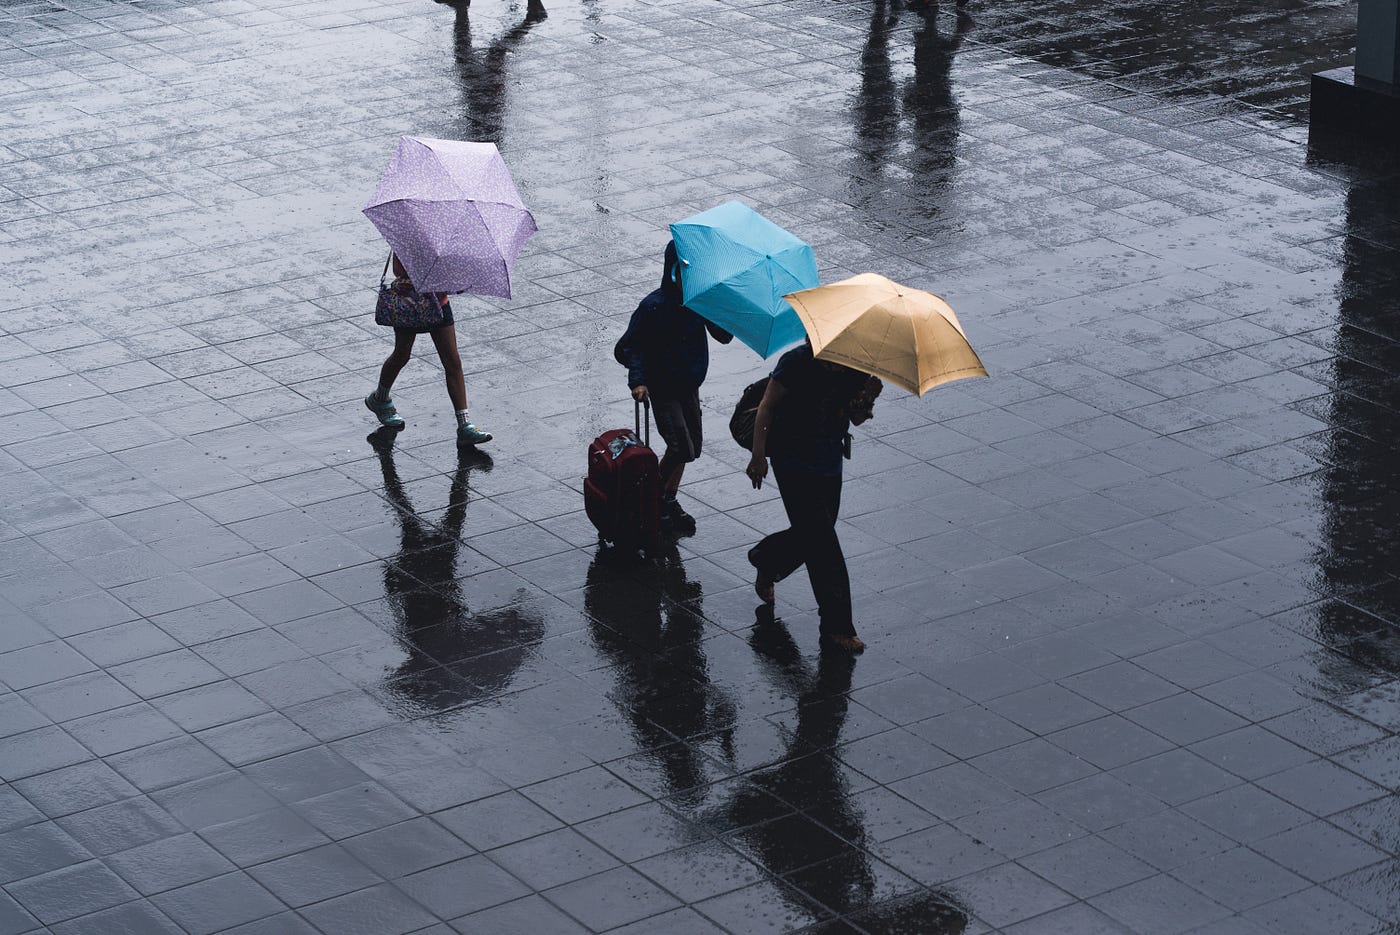 People walking in the rain with their umbrellas